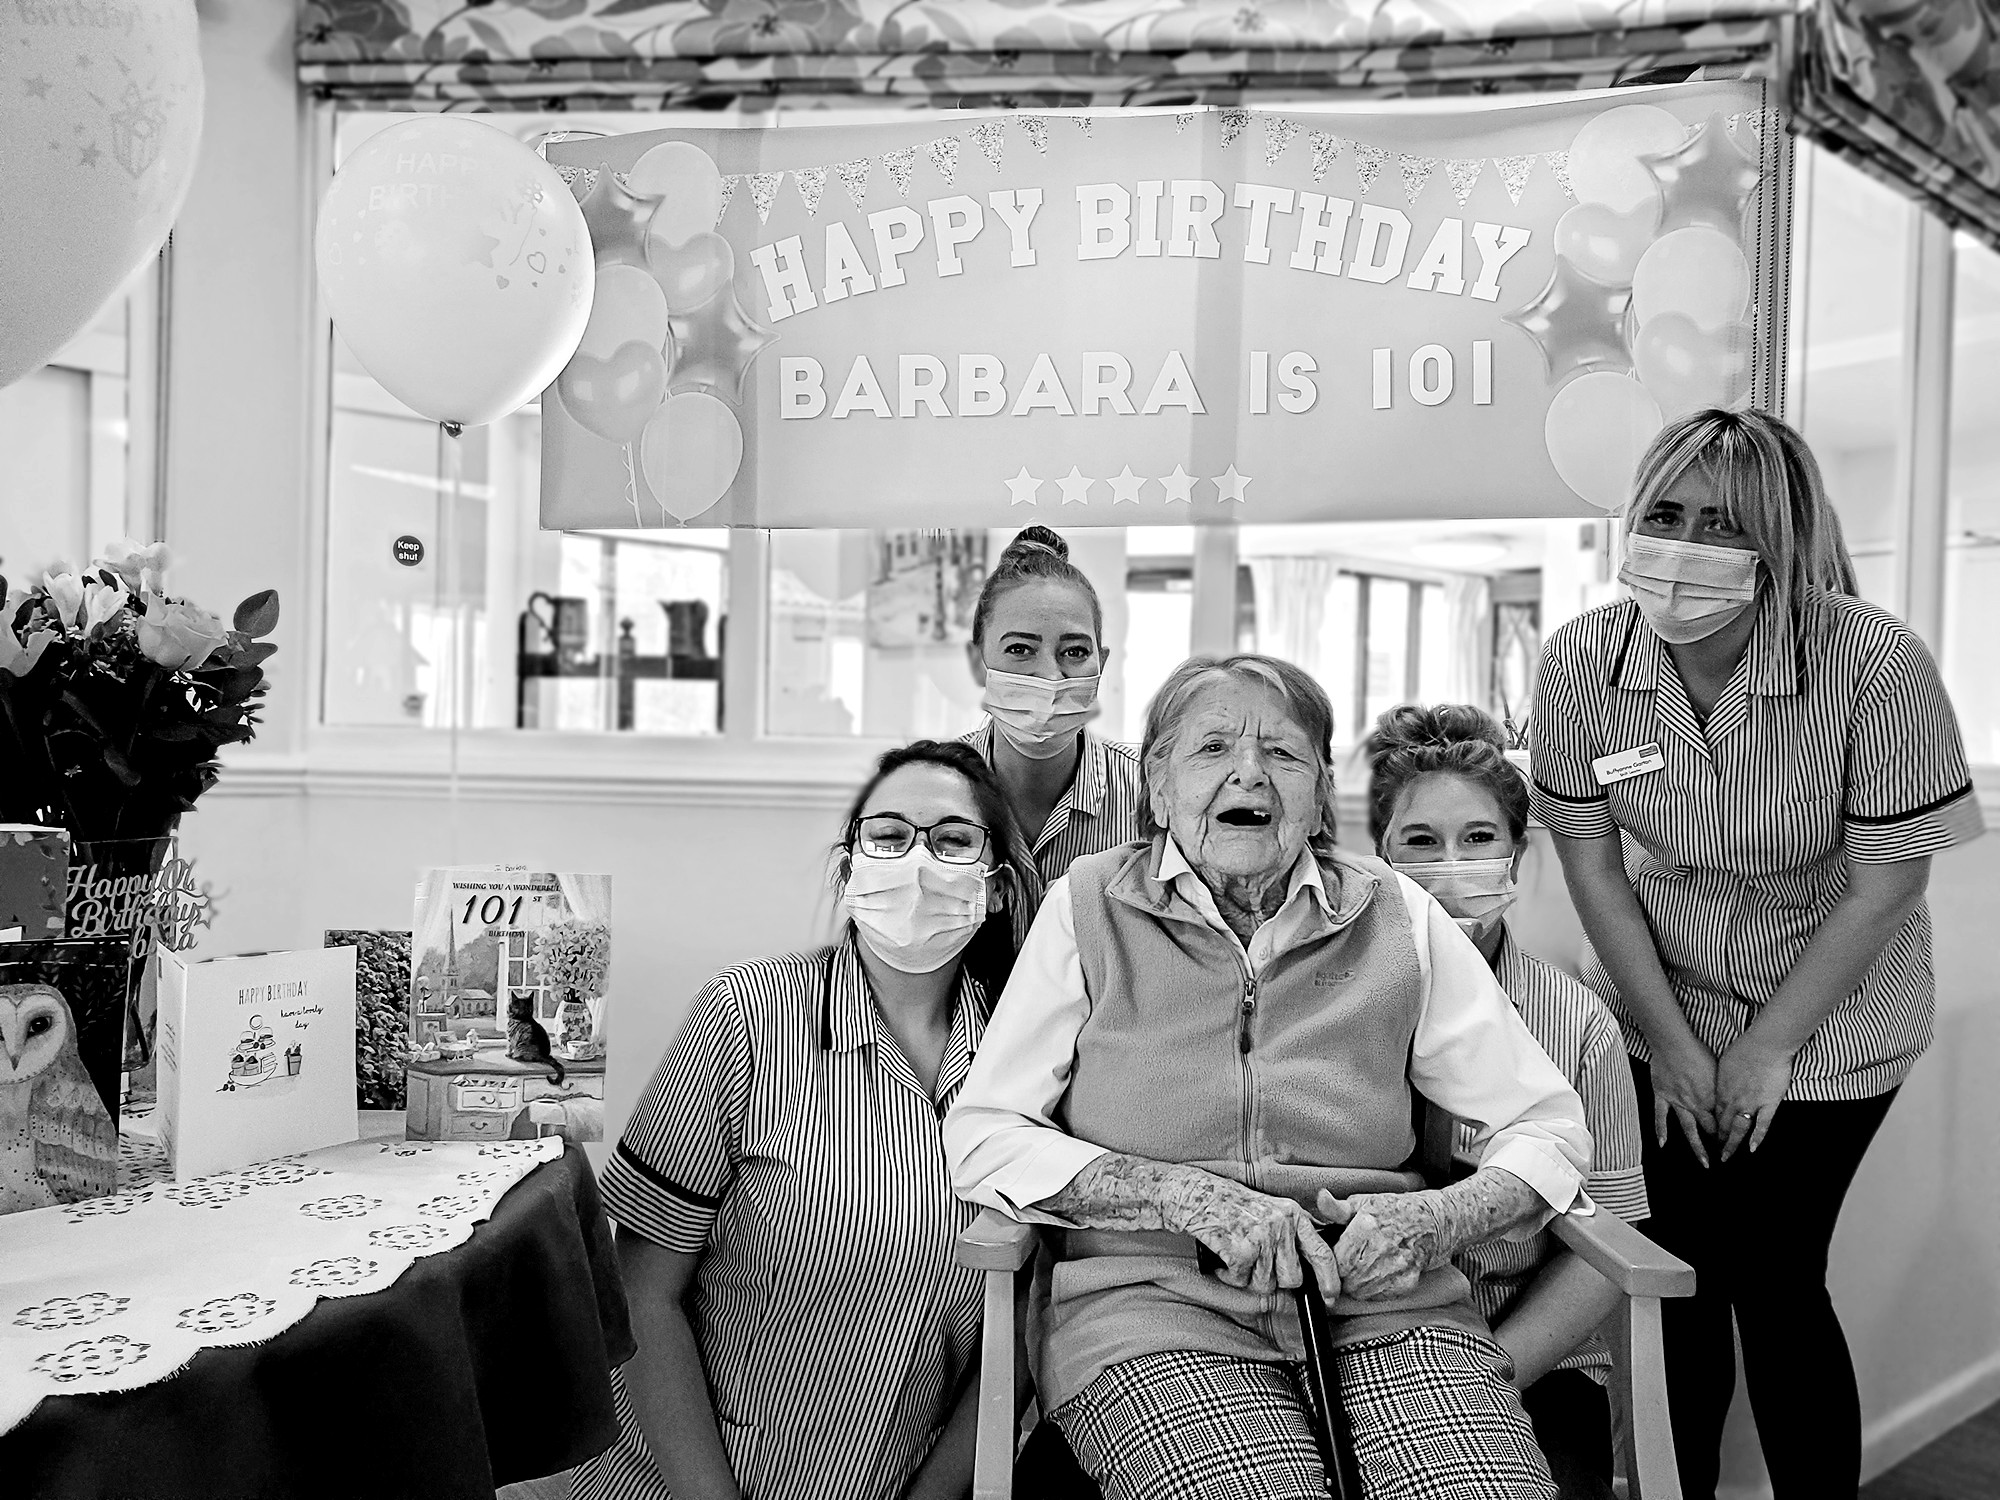 101st birthday at a care home